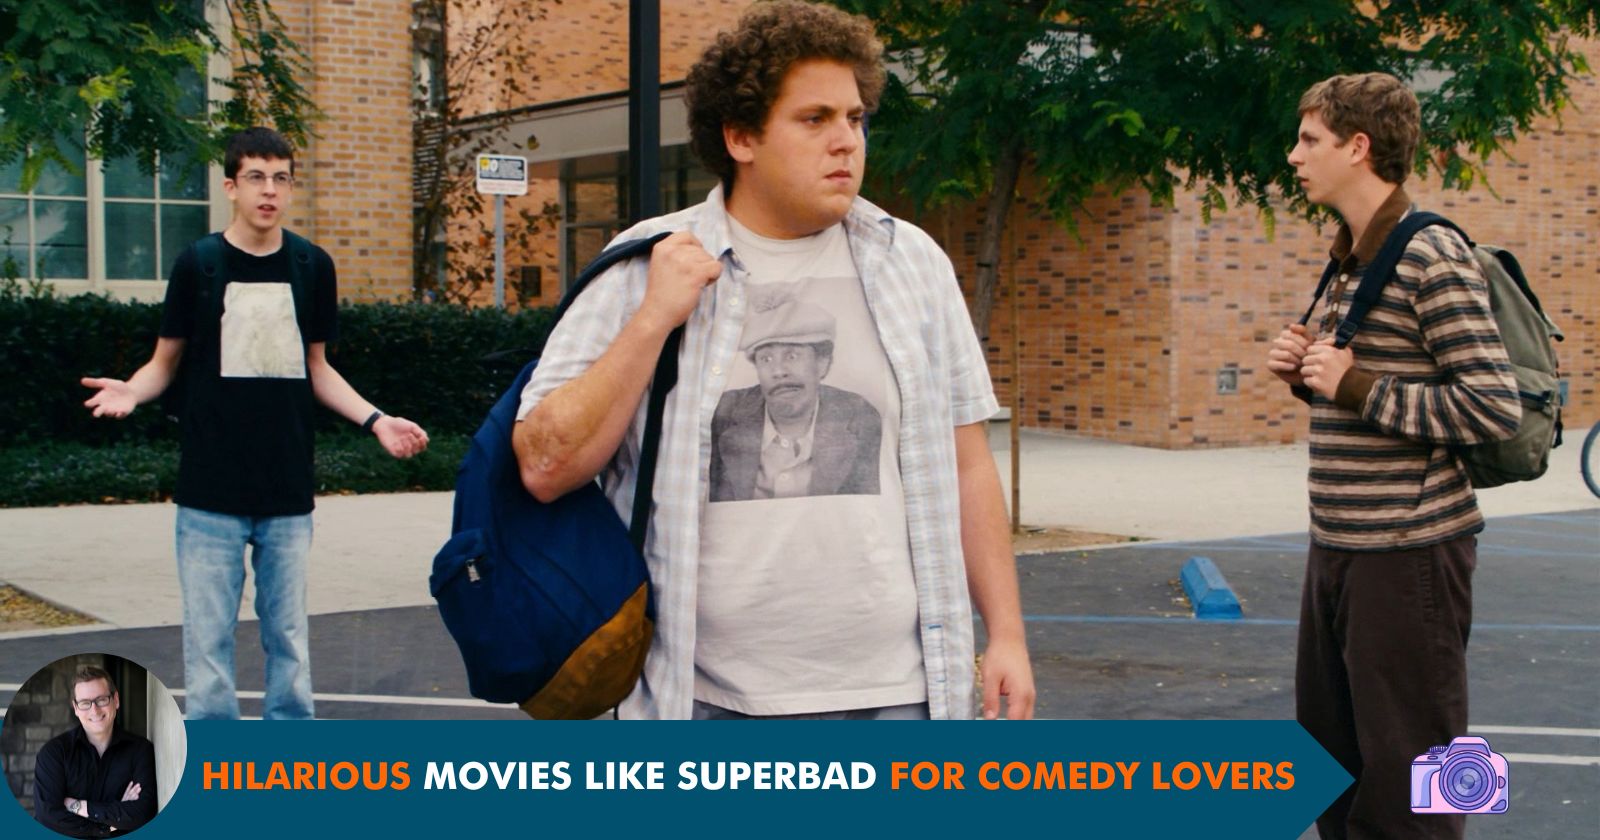 Hilarious Movies Like Superbad for Comedy Lovers